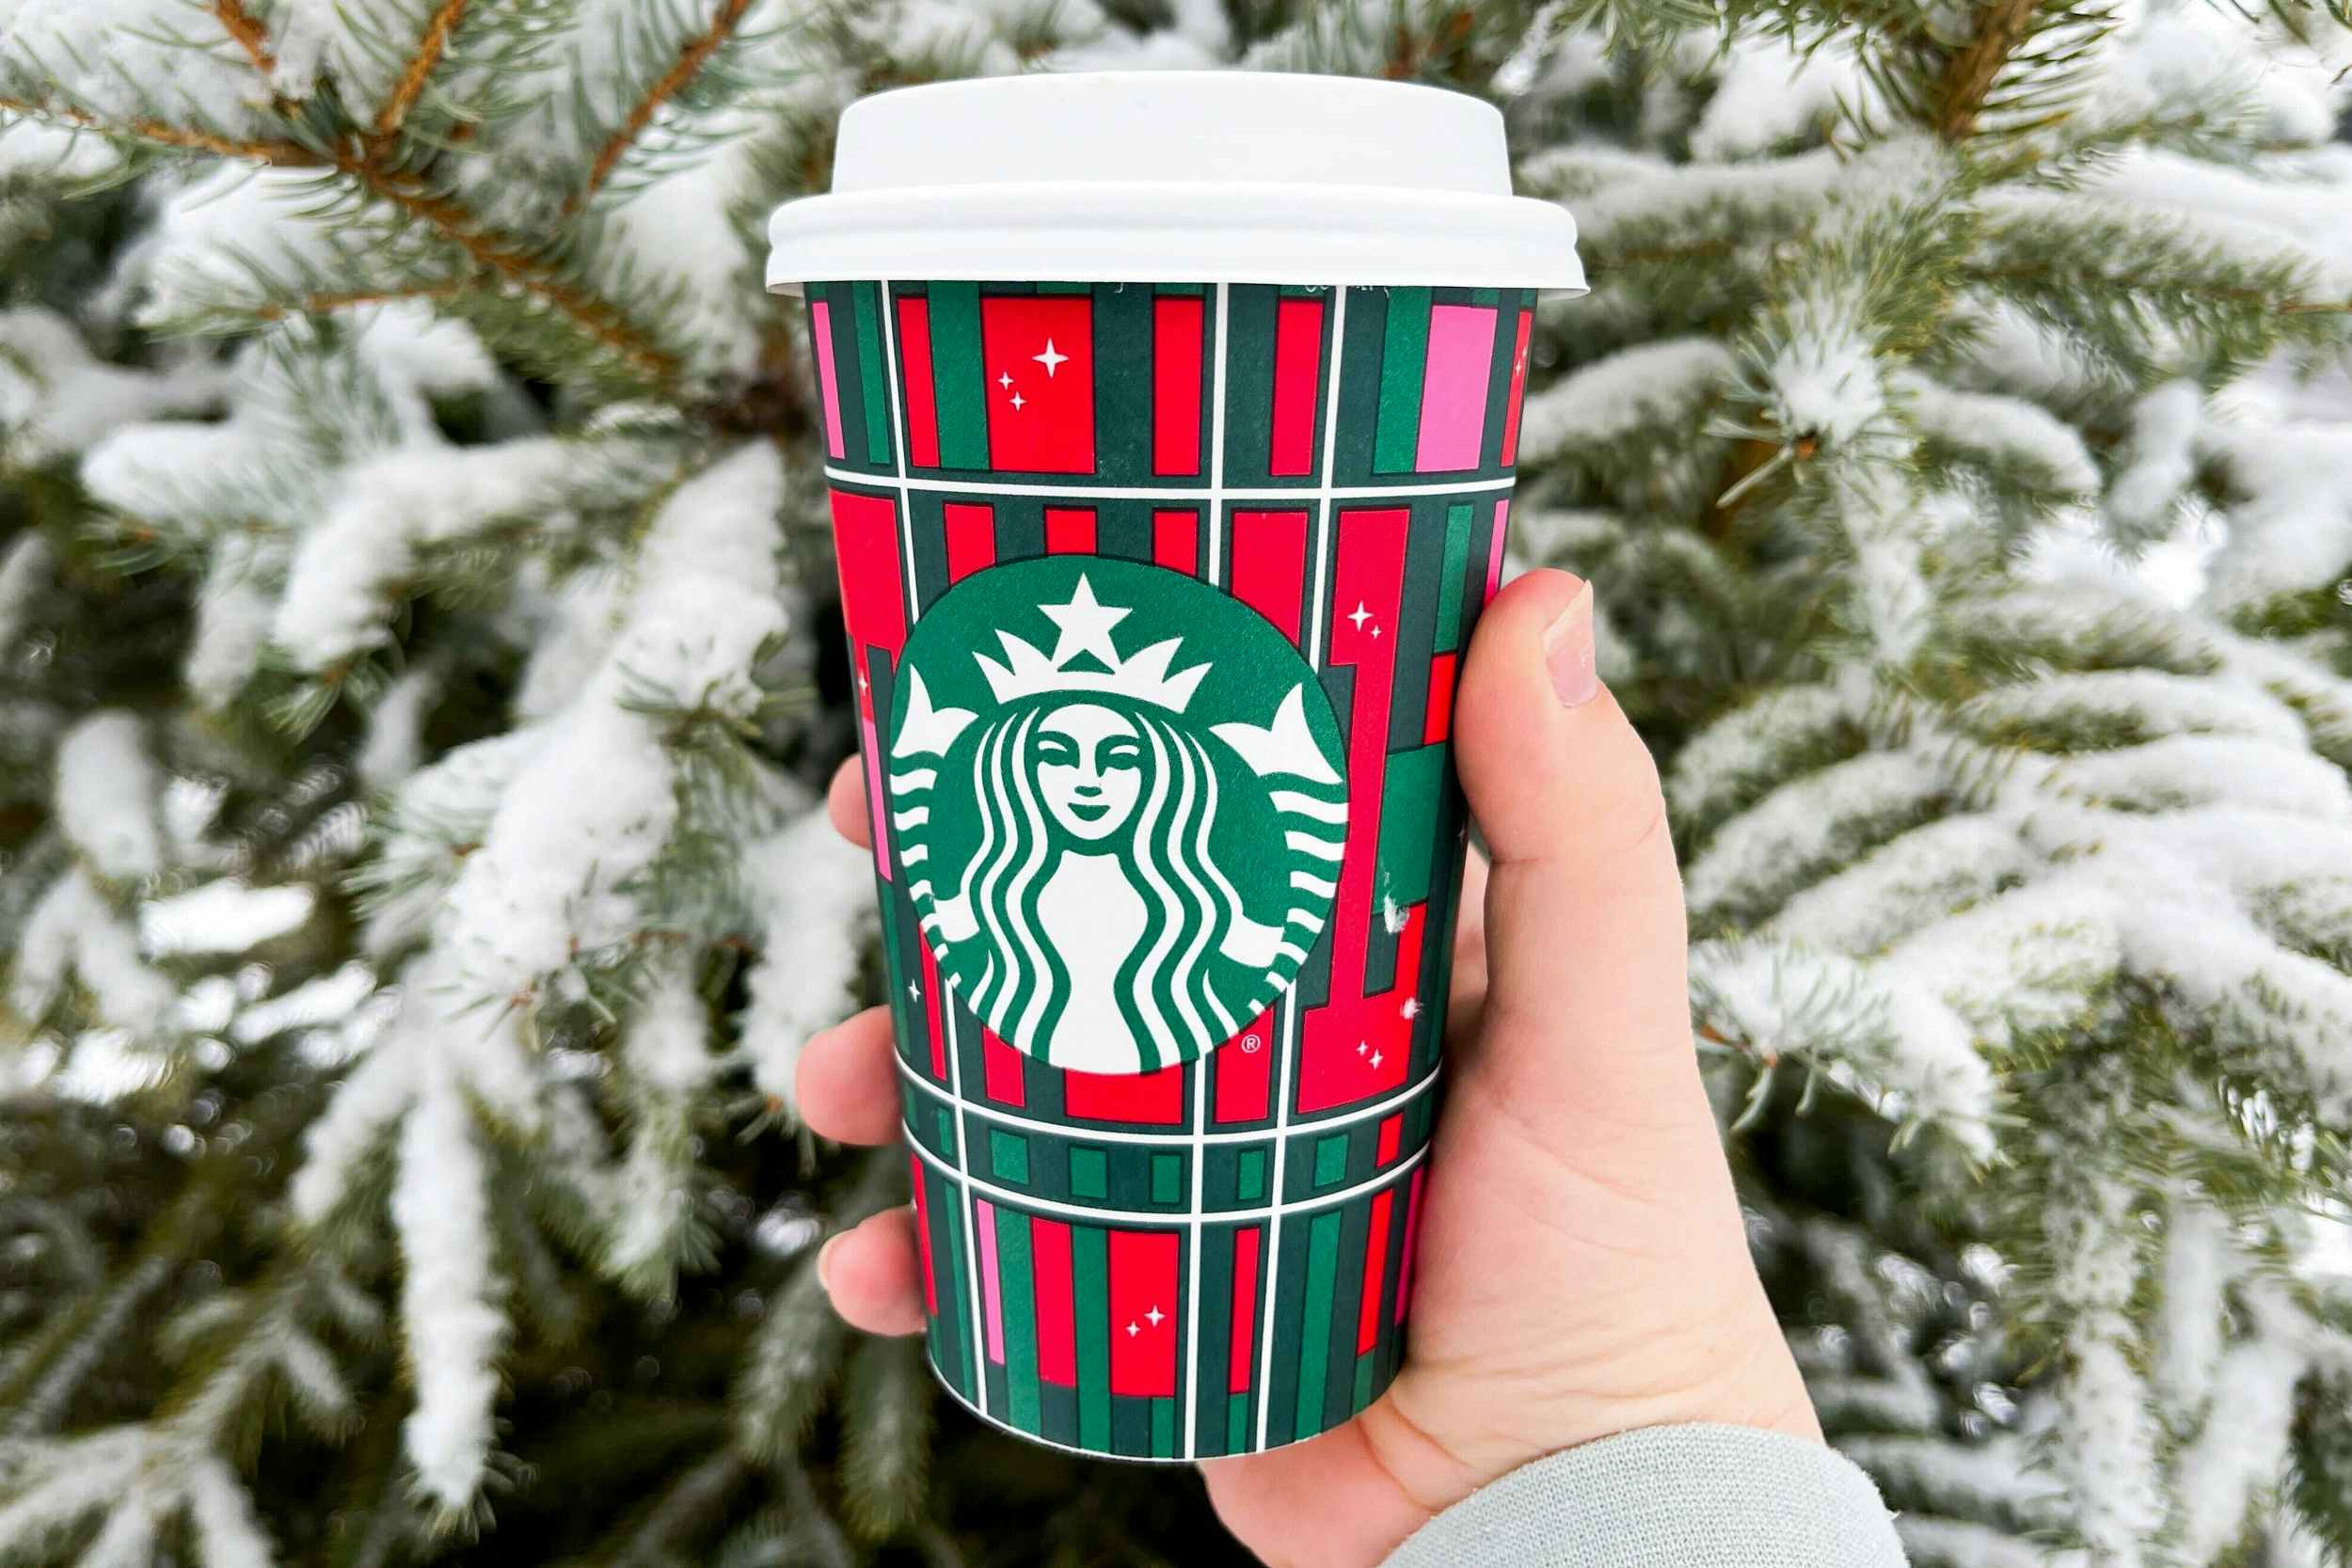 Every Starbucks drink is 50% off today: How to get the deal 